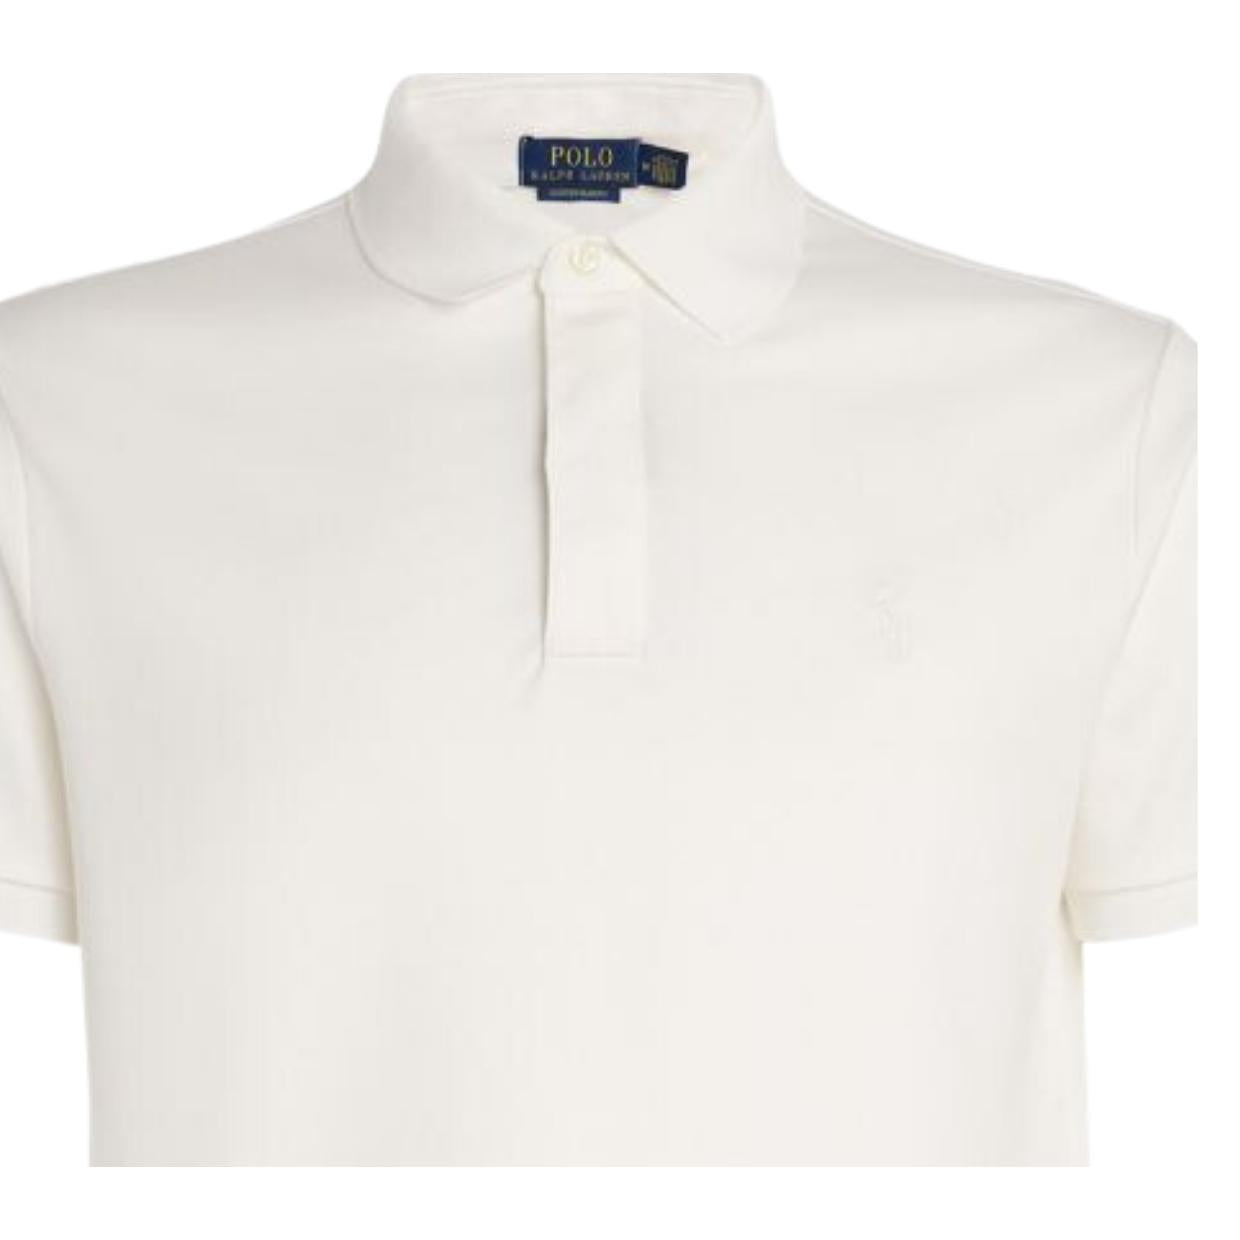 Polo Ralph Lauren Concealed Placket White Polo Shirt